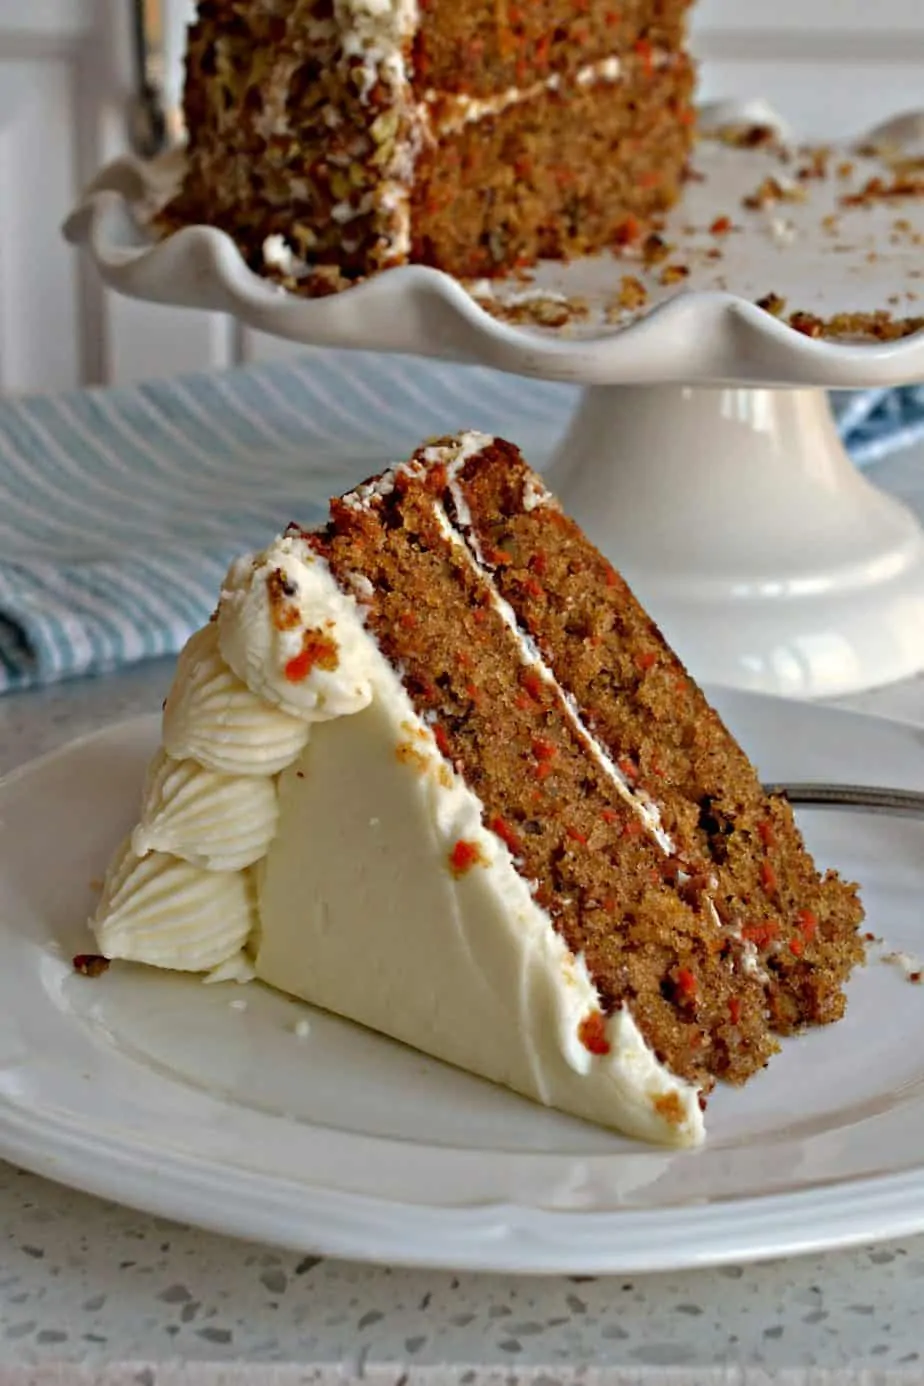 Carrot Cake Recipe with Cream Cheese Frosting - Recipes by Carina